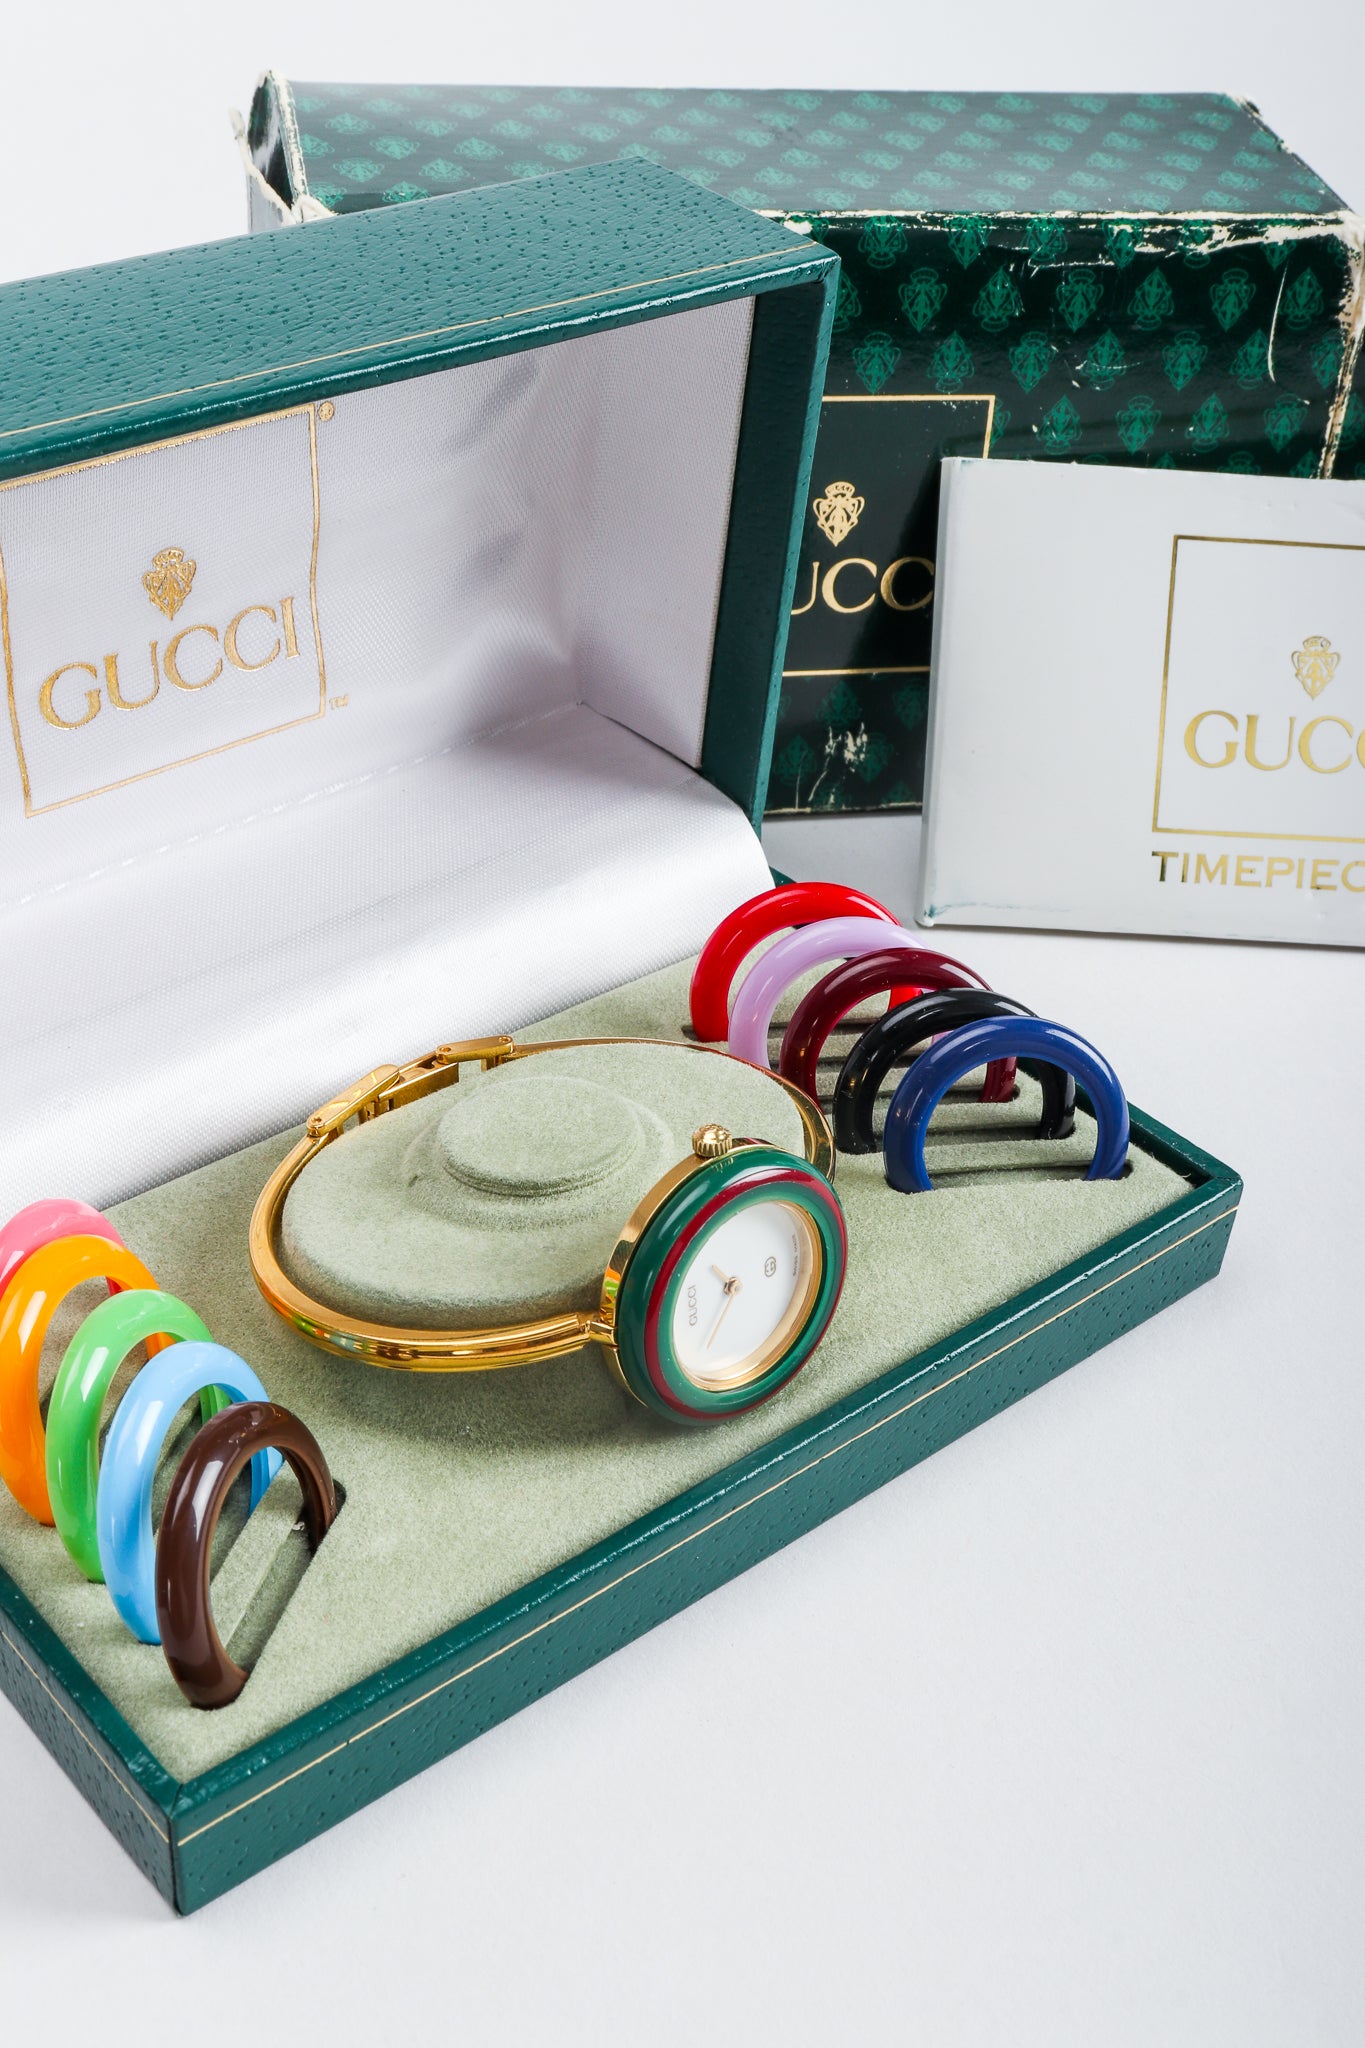 Vintage Gucci 1952 Boxed Bracelet Watch with Interchangeable Bezels with original warranty card